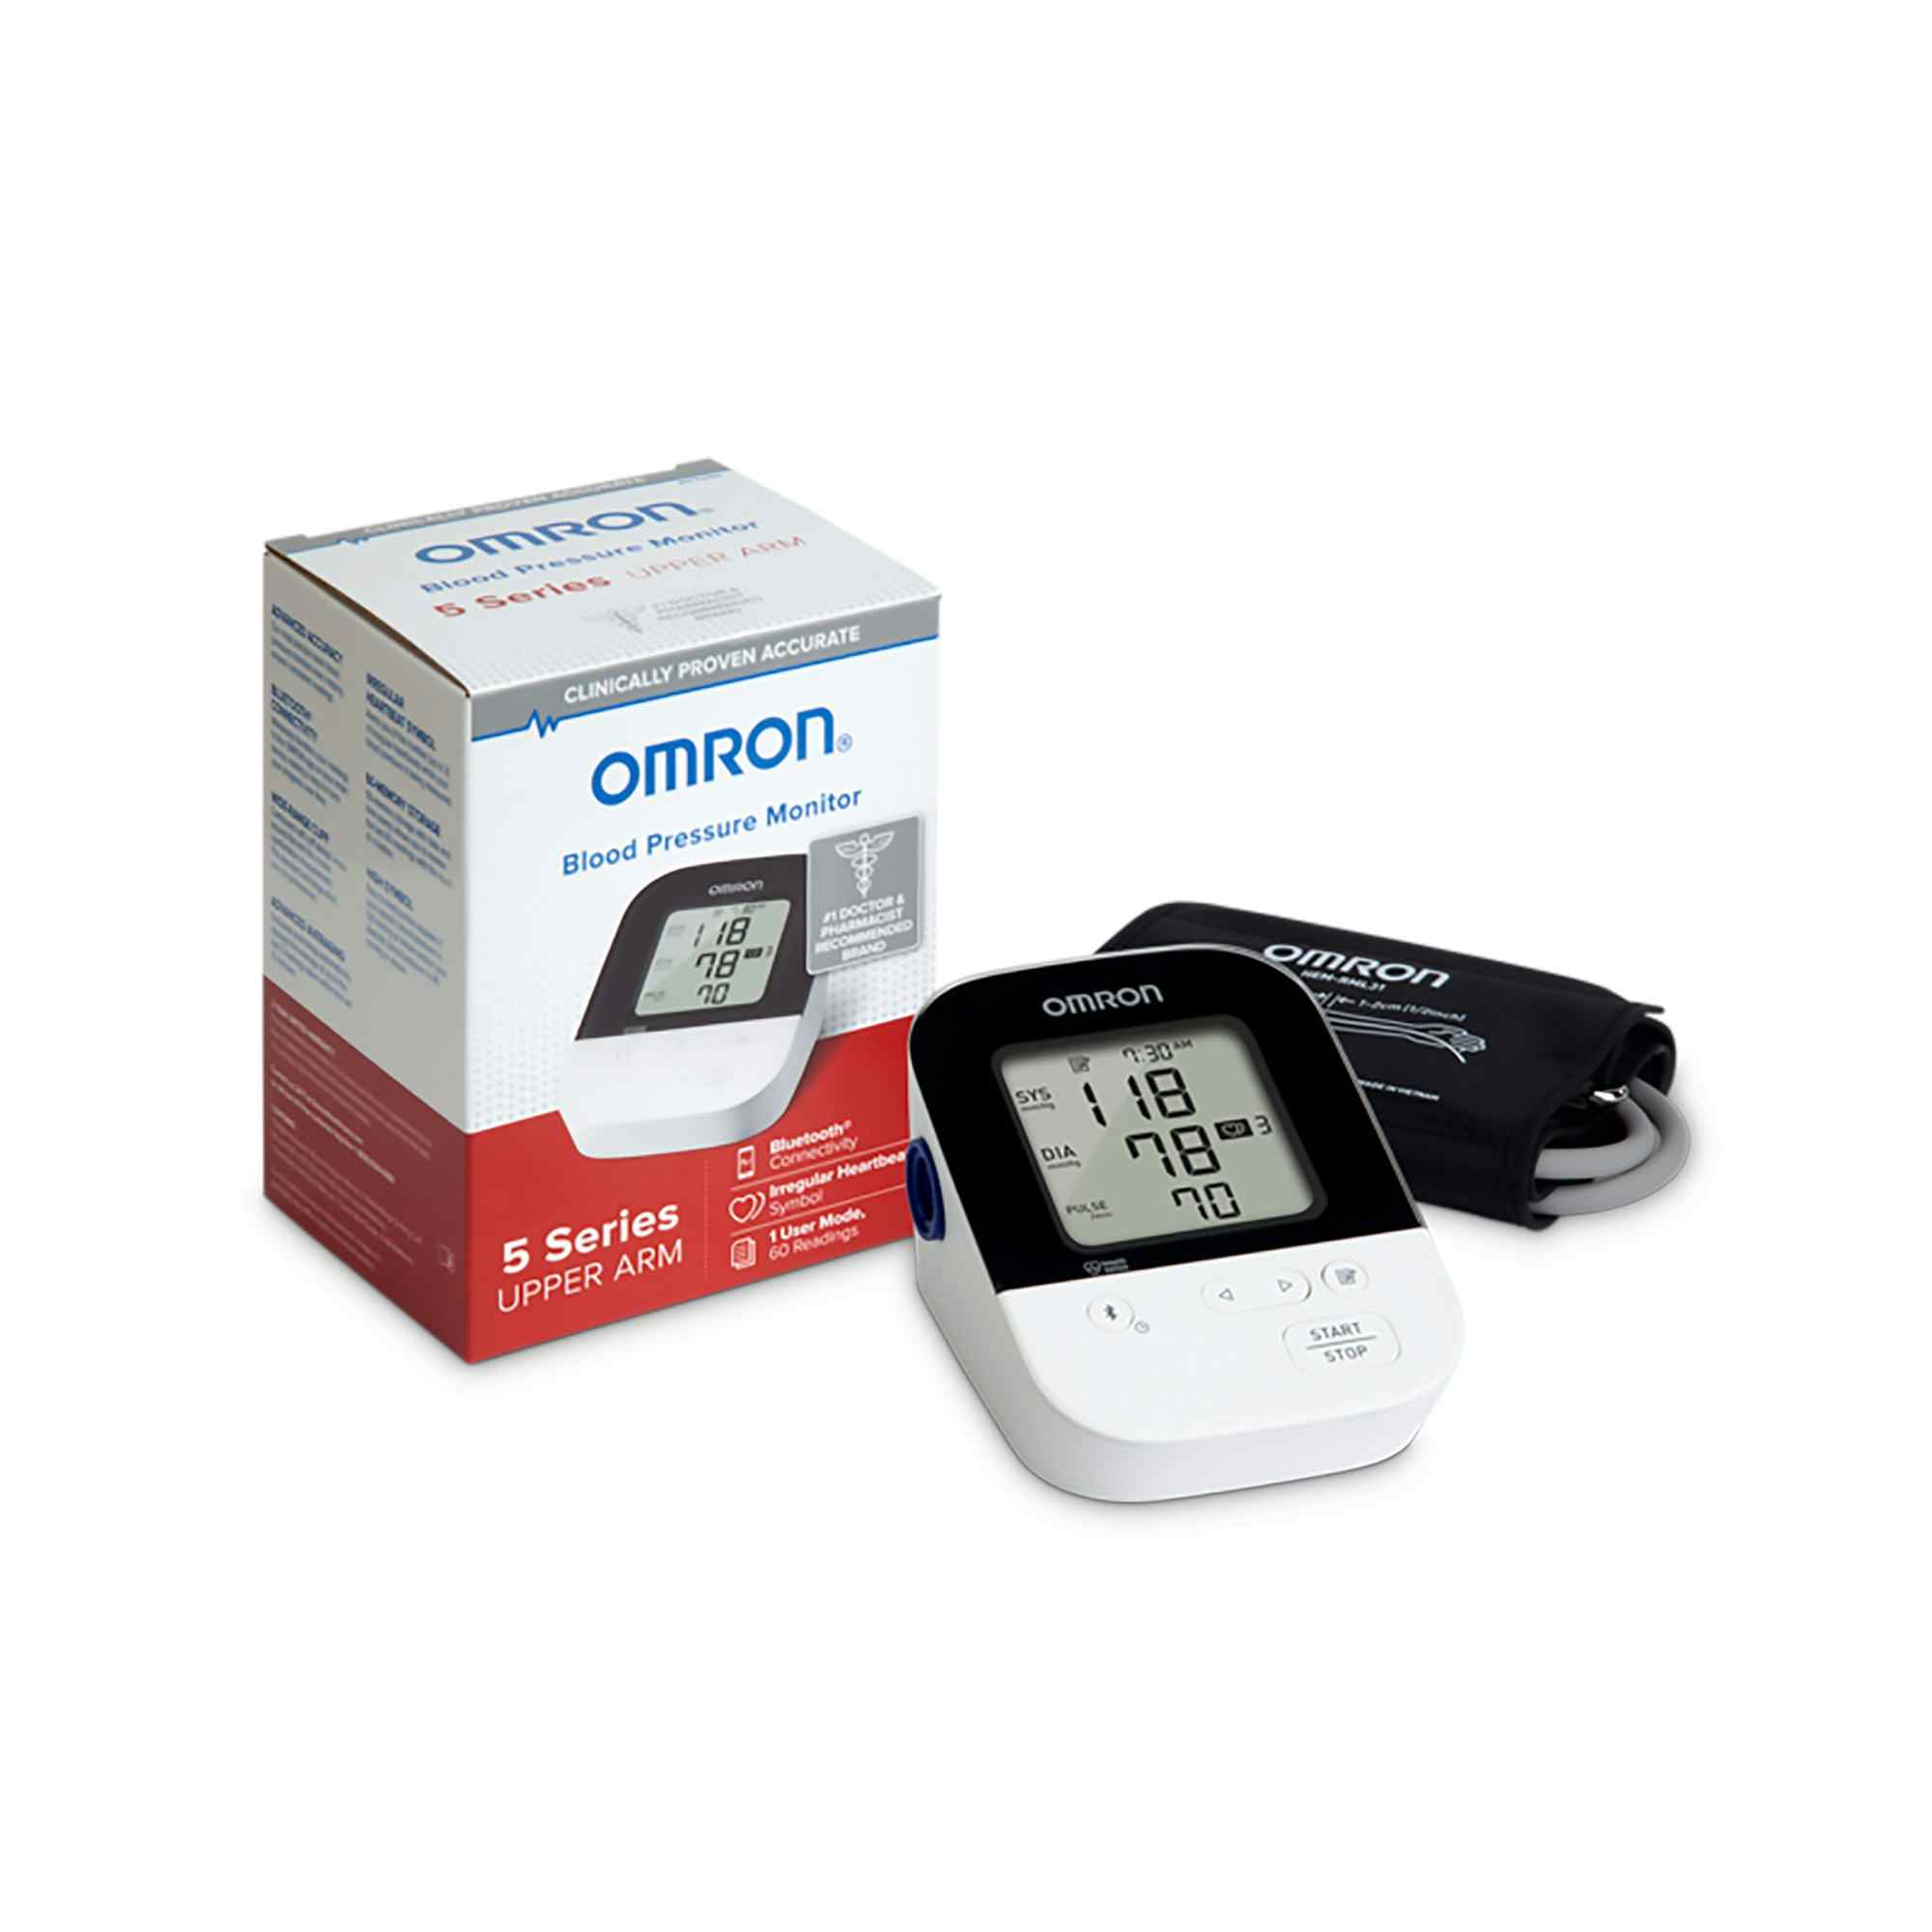 Omron Digital Blood Pressure Monitor, 5 Series Upper Arm with Bluetooth Connectivity, BP7250, 1 Monitor